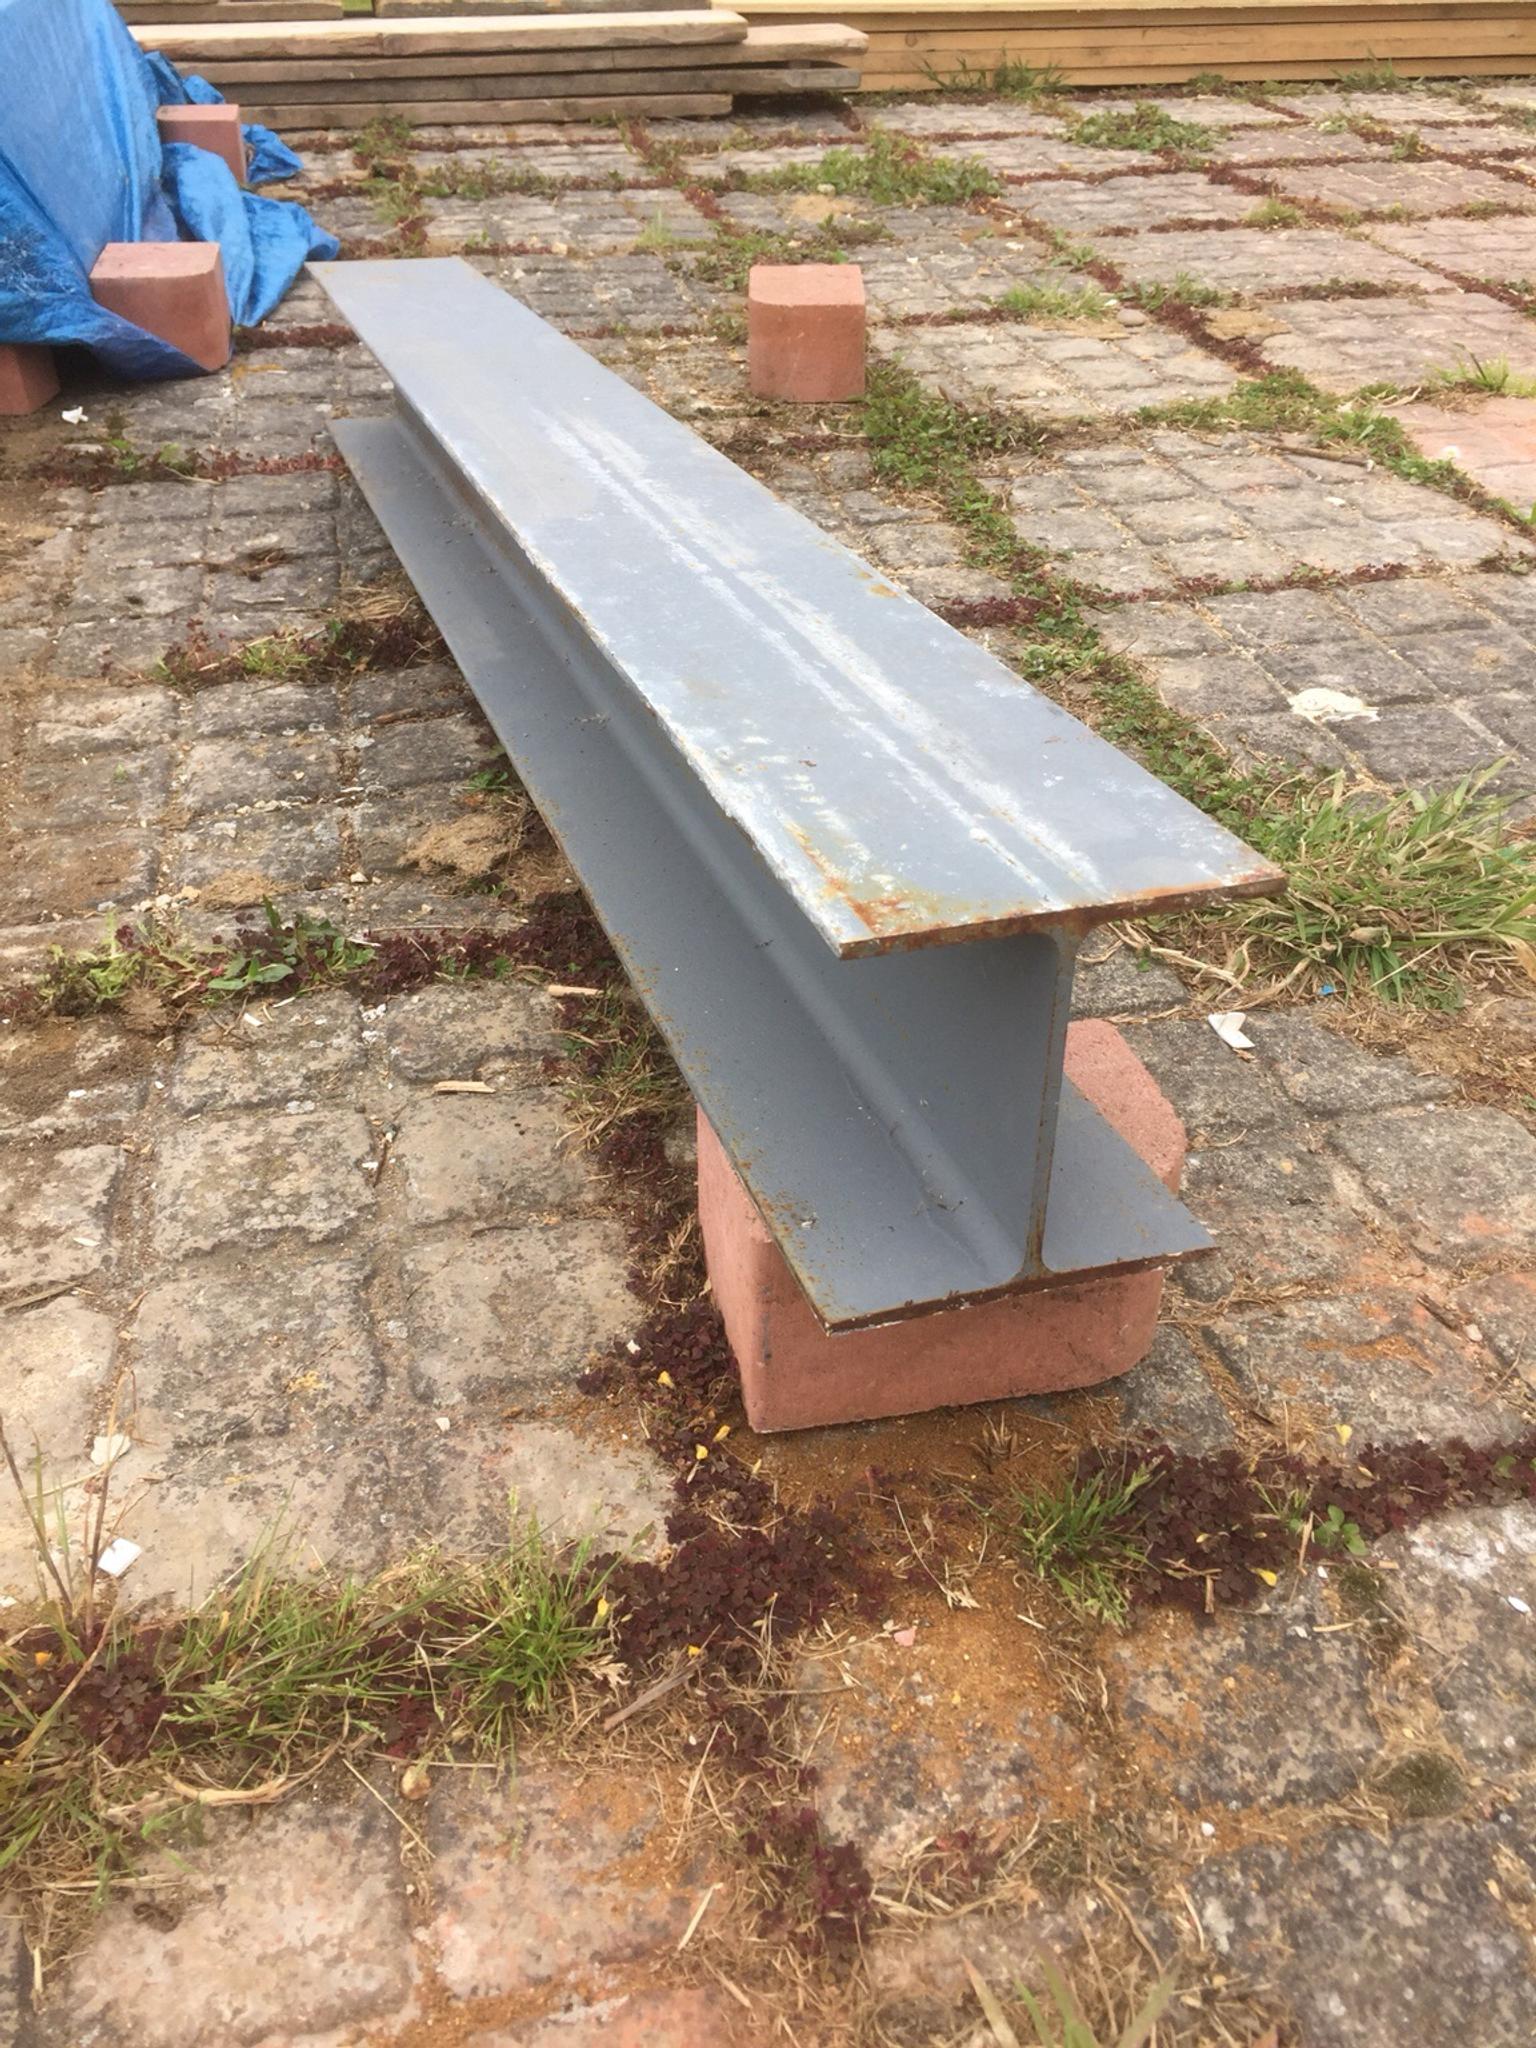 RSJ / Steel Beam / needle for acrows in Maldon for £25.00 for sale | Shpock